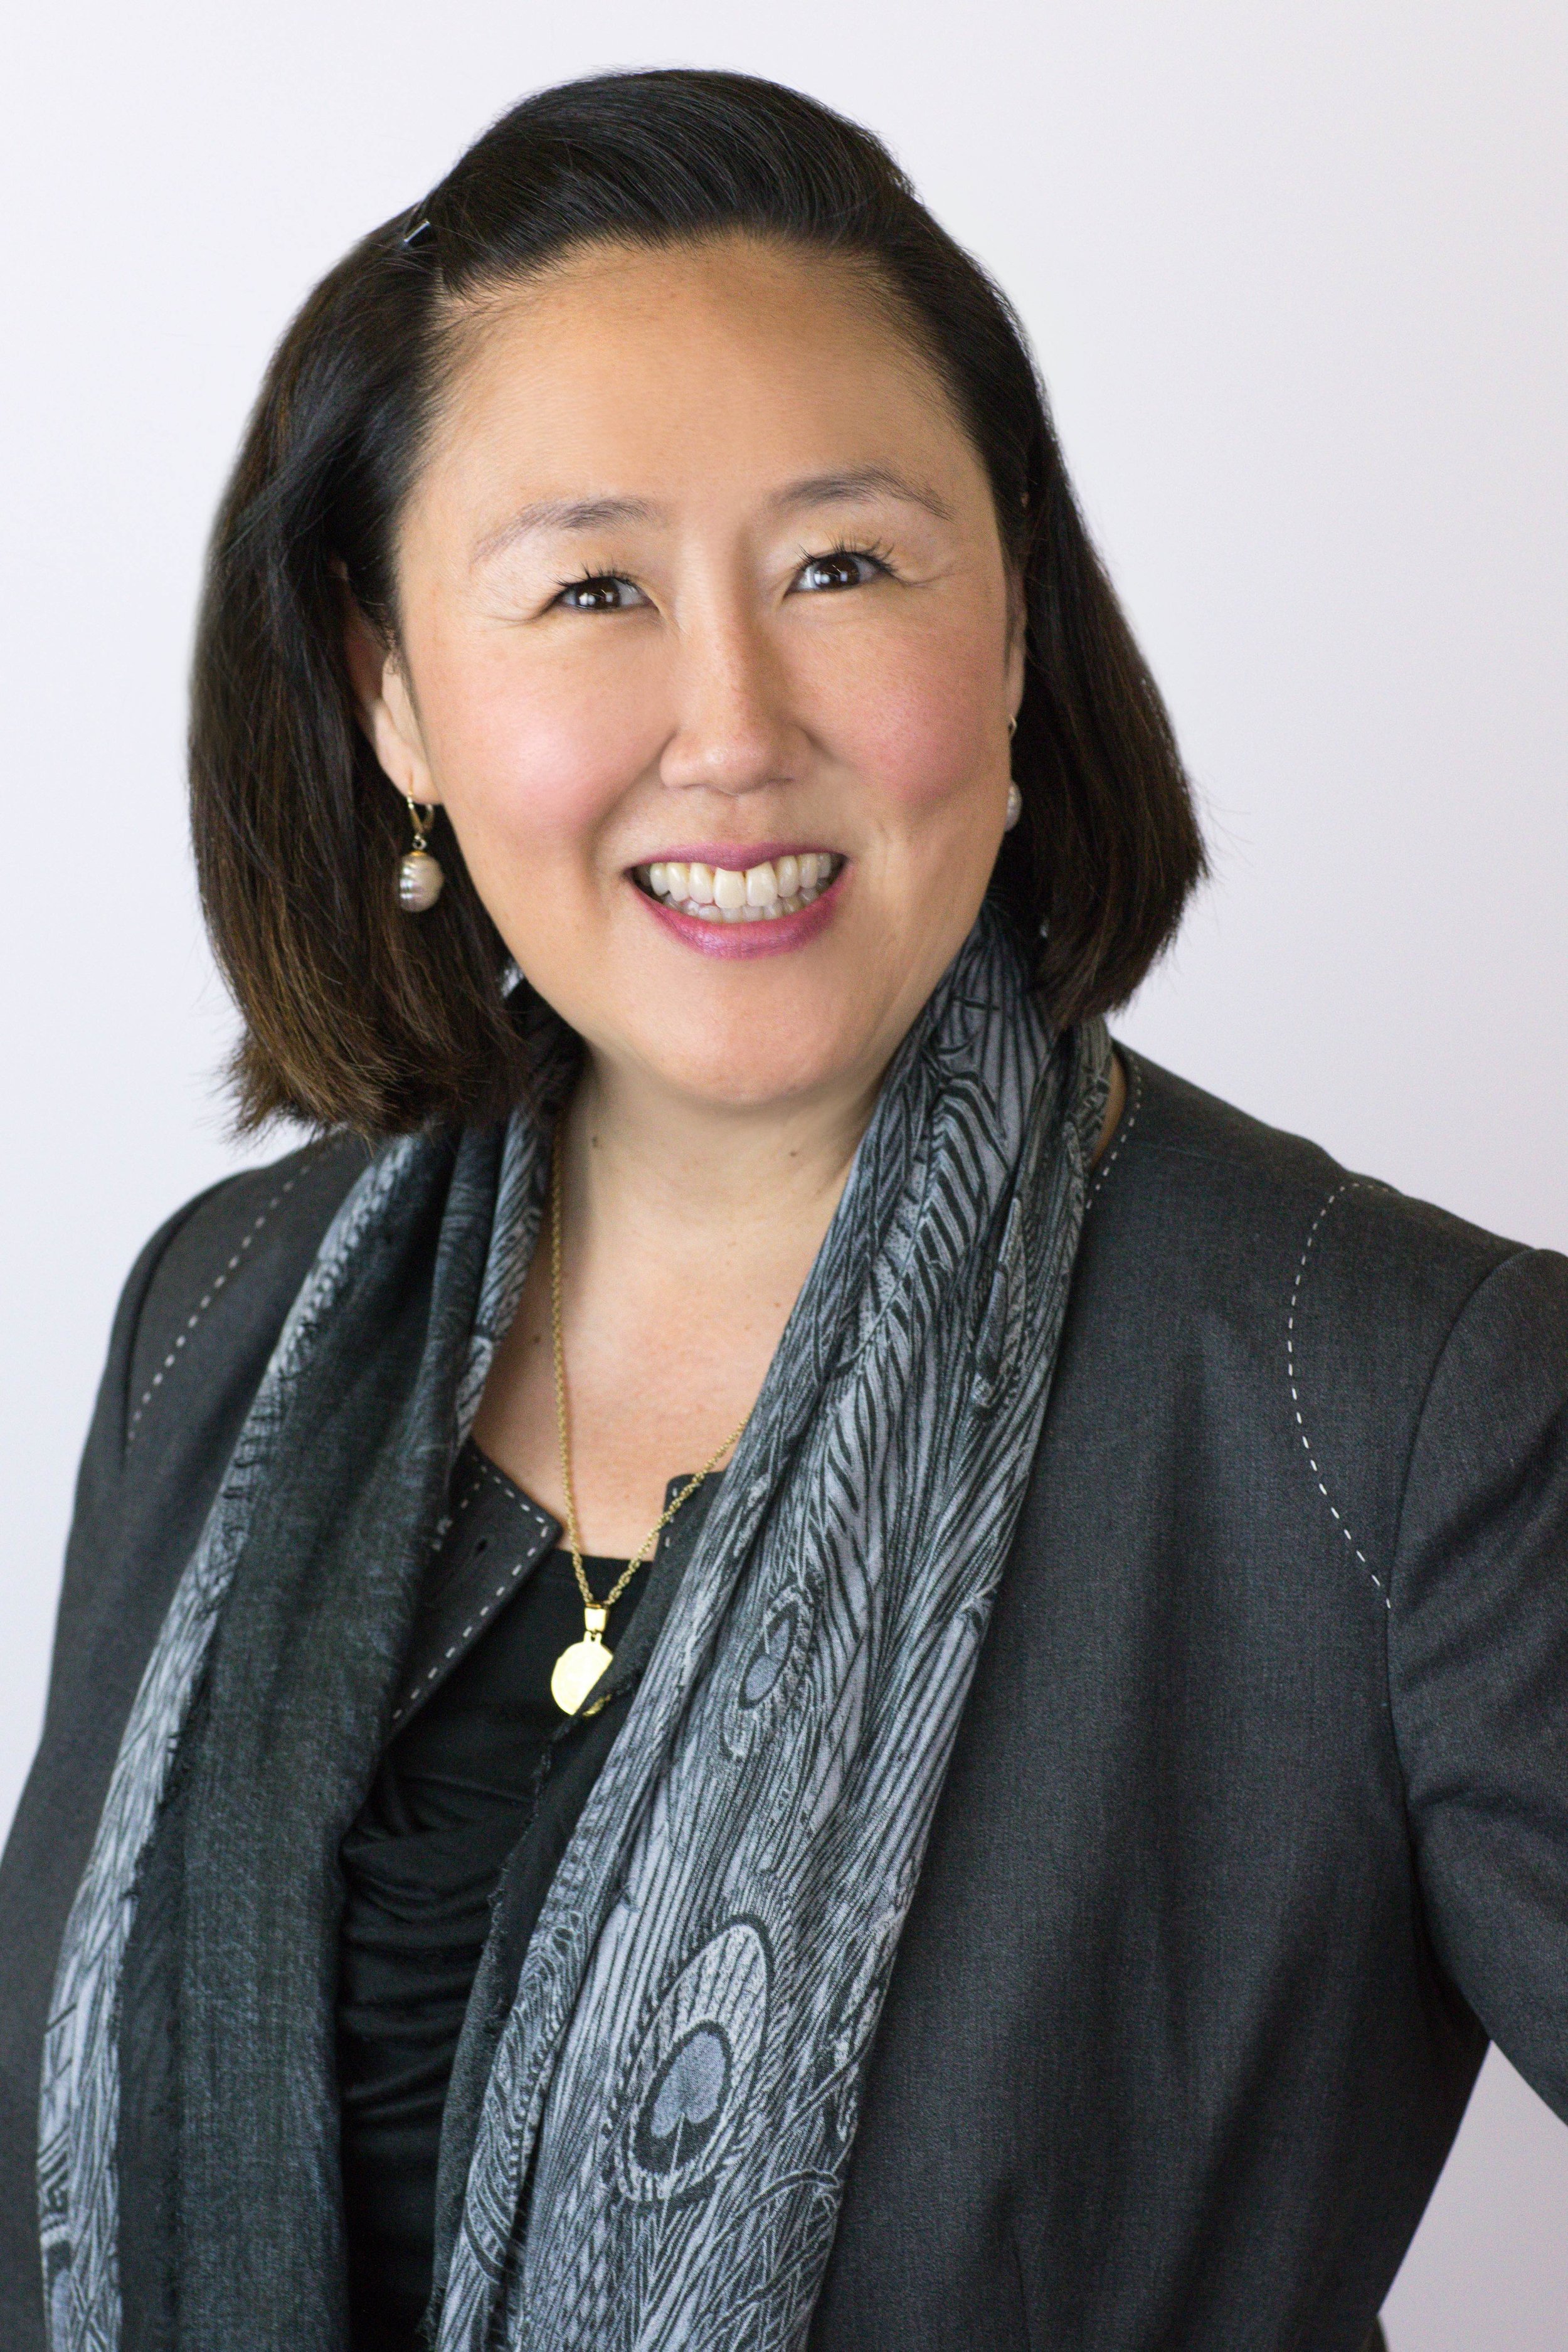 Sonia Lo, CEO of Crop One Holdings.